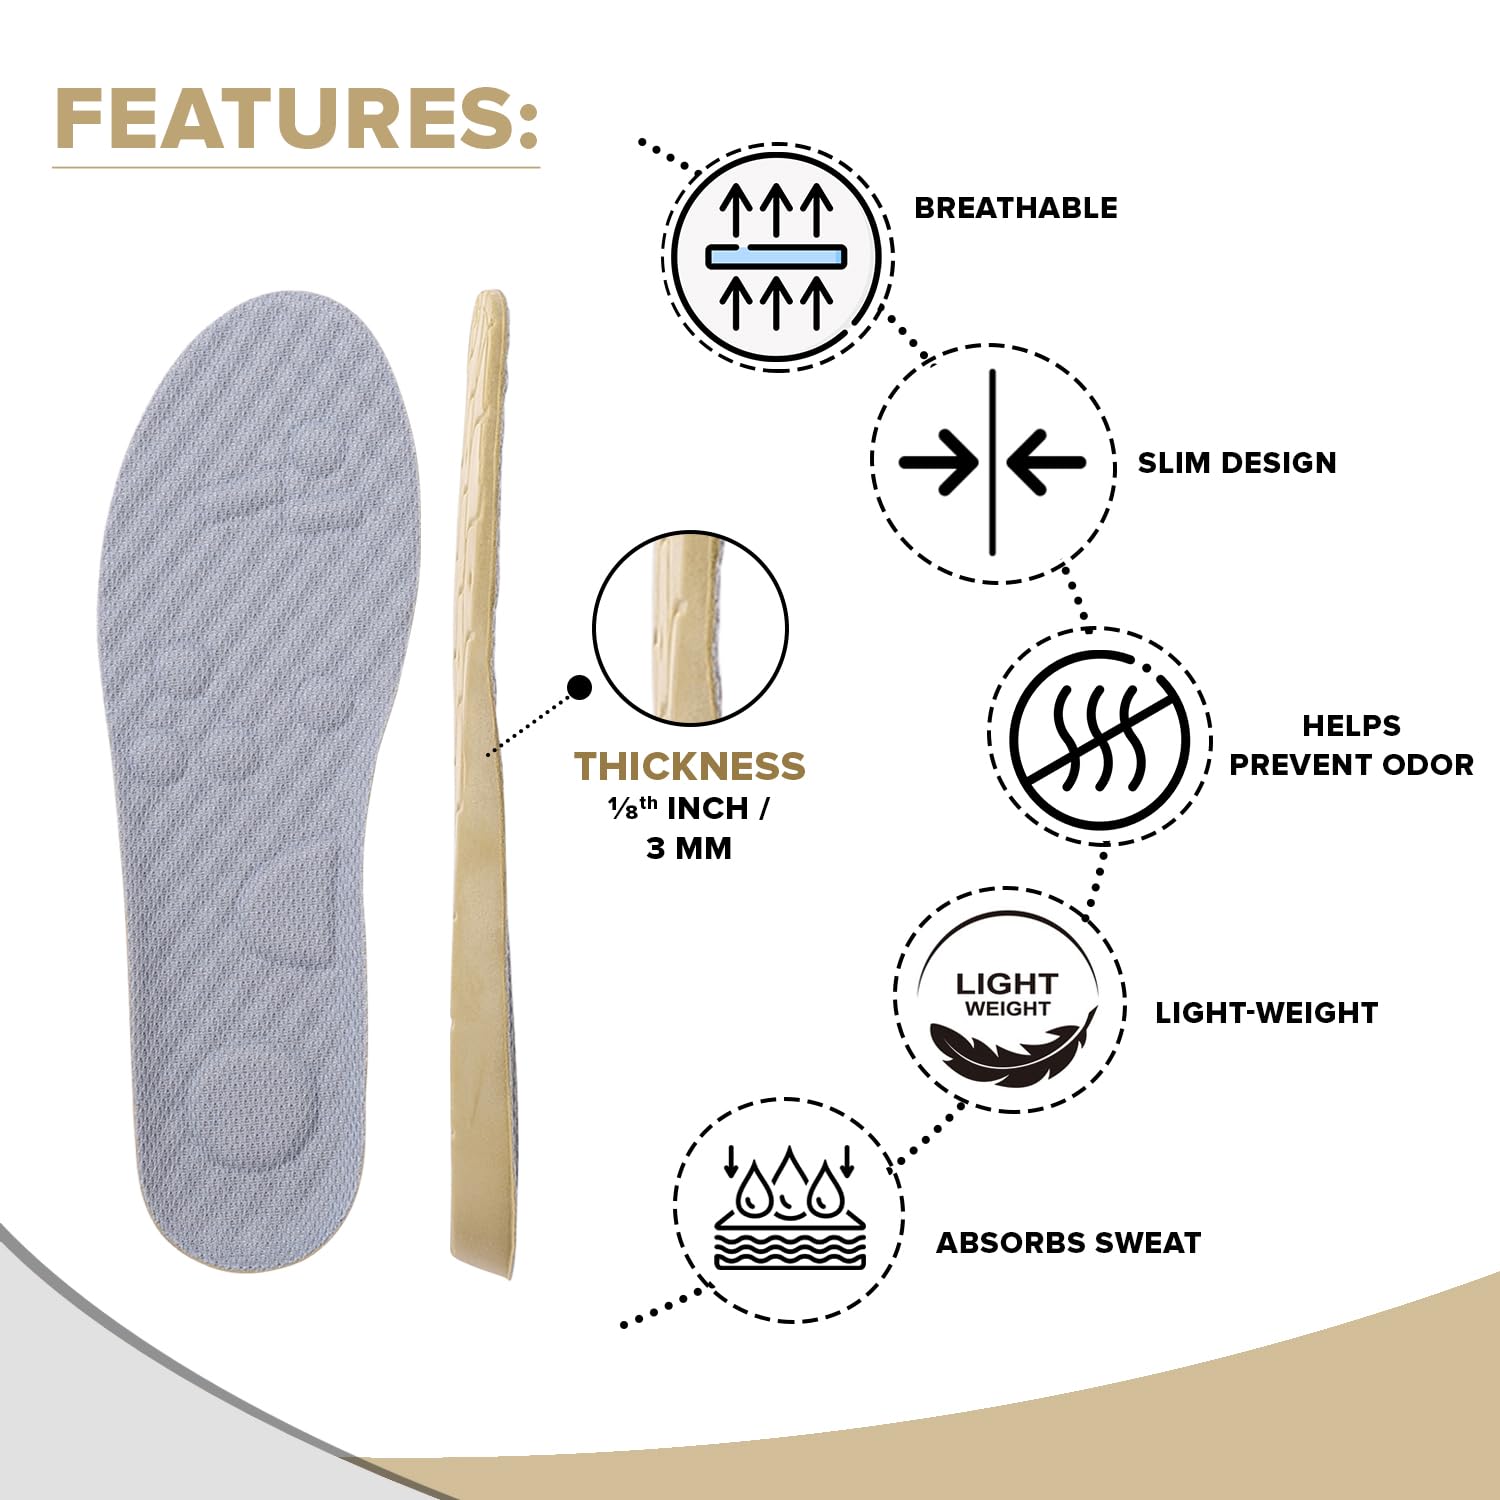 Dr Foot Odor-Fighting Insoles | For Odor Free, Sweat Absorption, Breathable, Comfortable Massage| Latex Insoles for Deodorizing and Comfort | For Men & Women - 1 Pair (Medium Size)